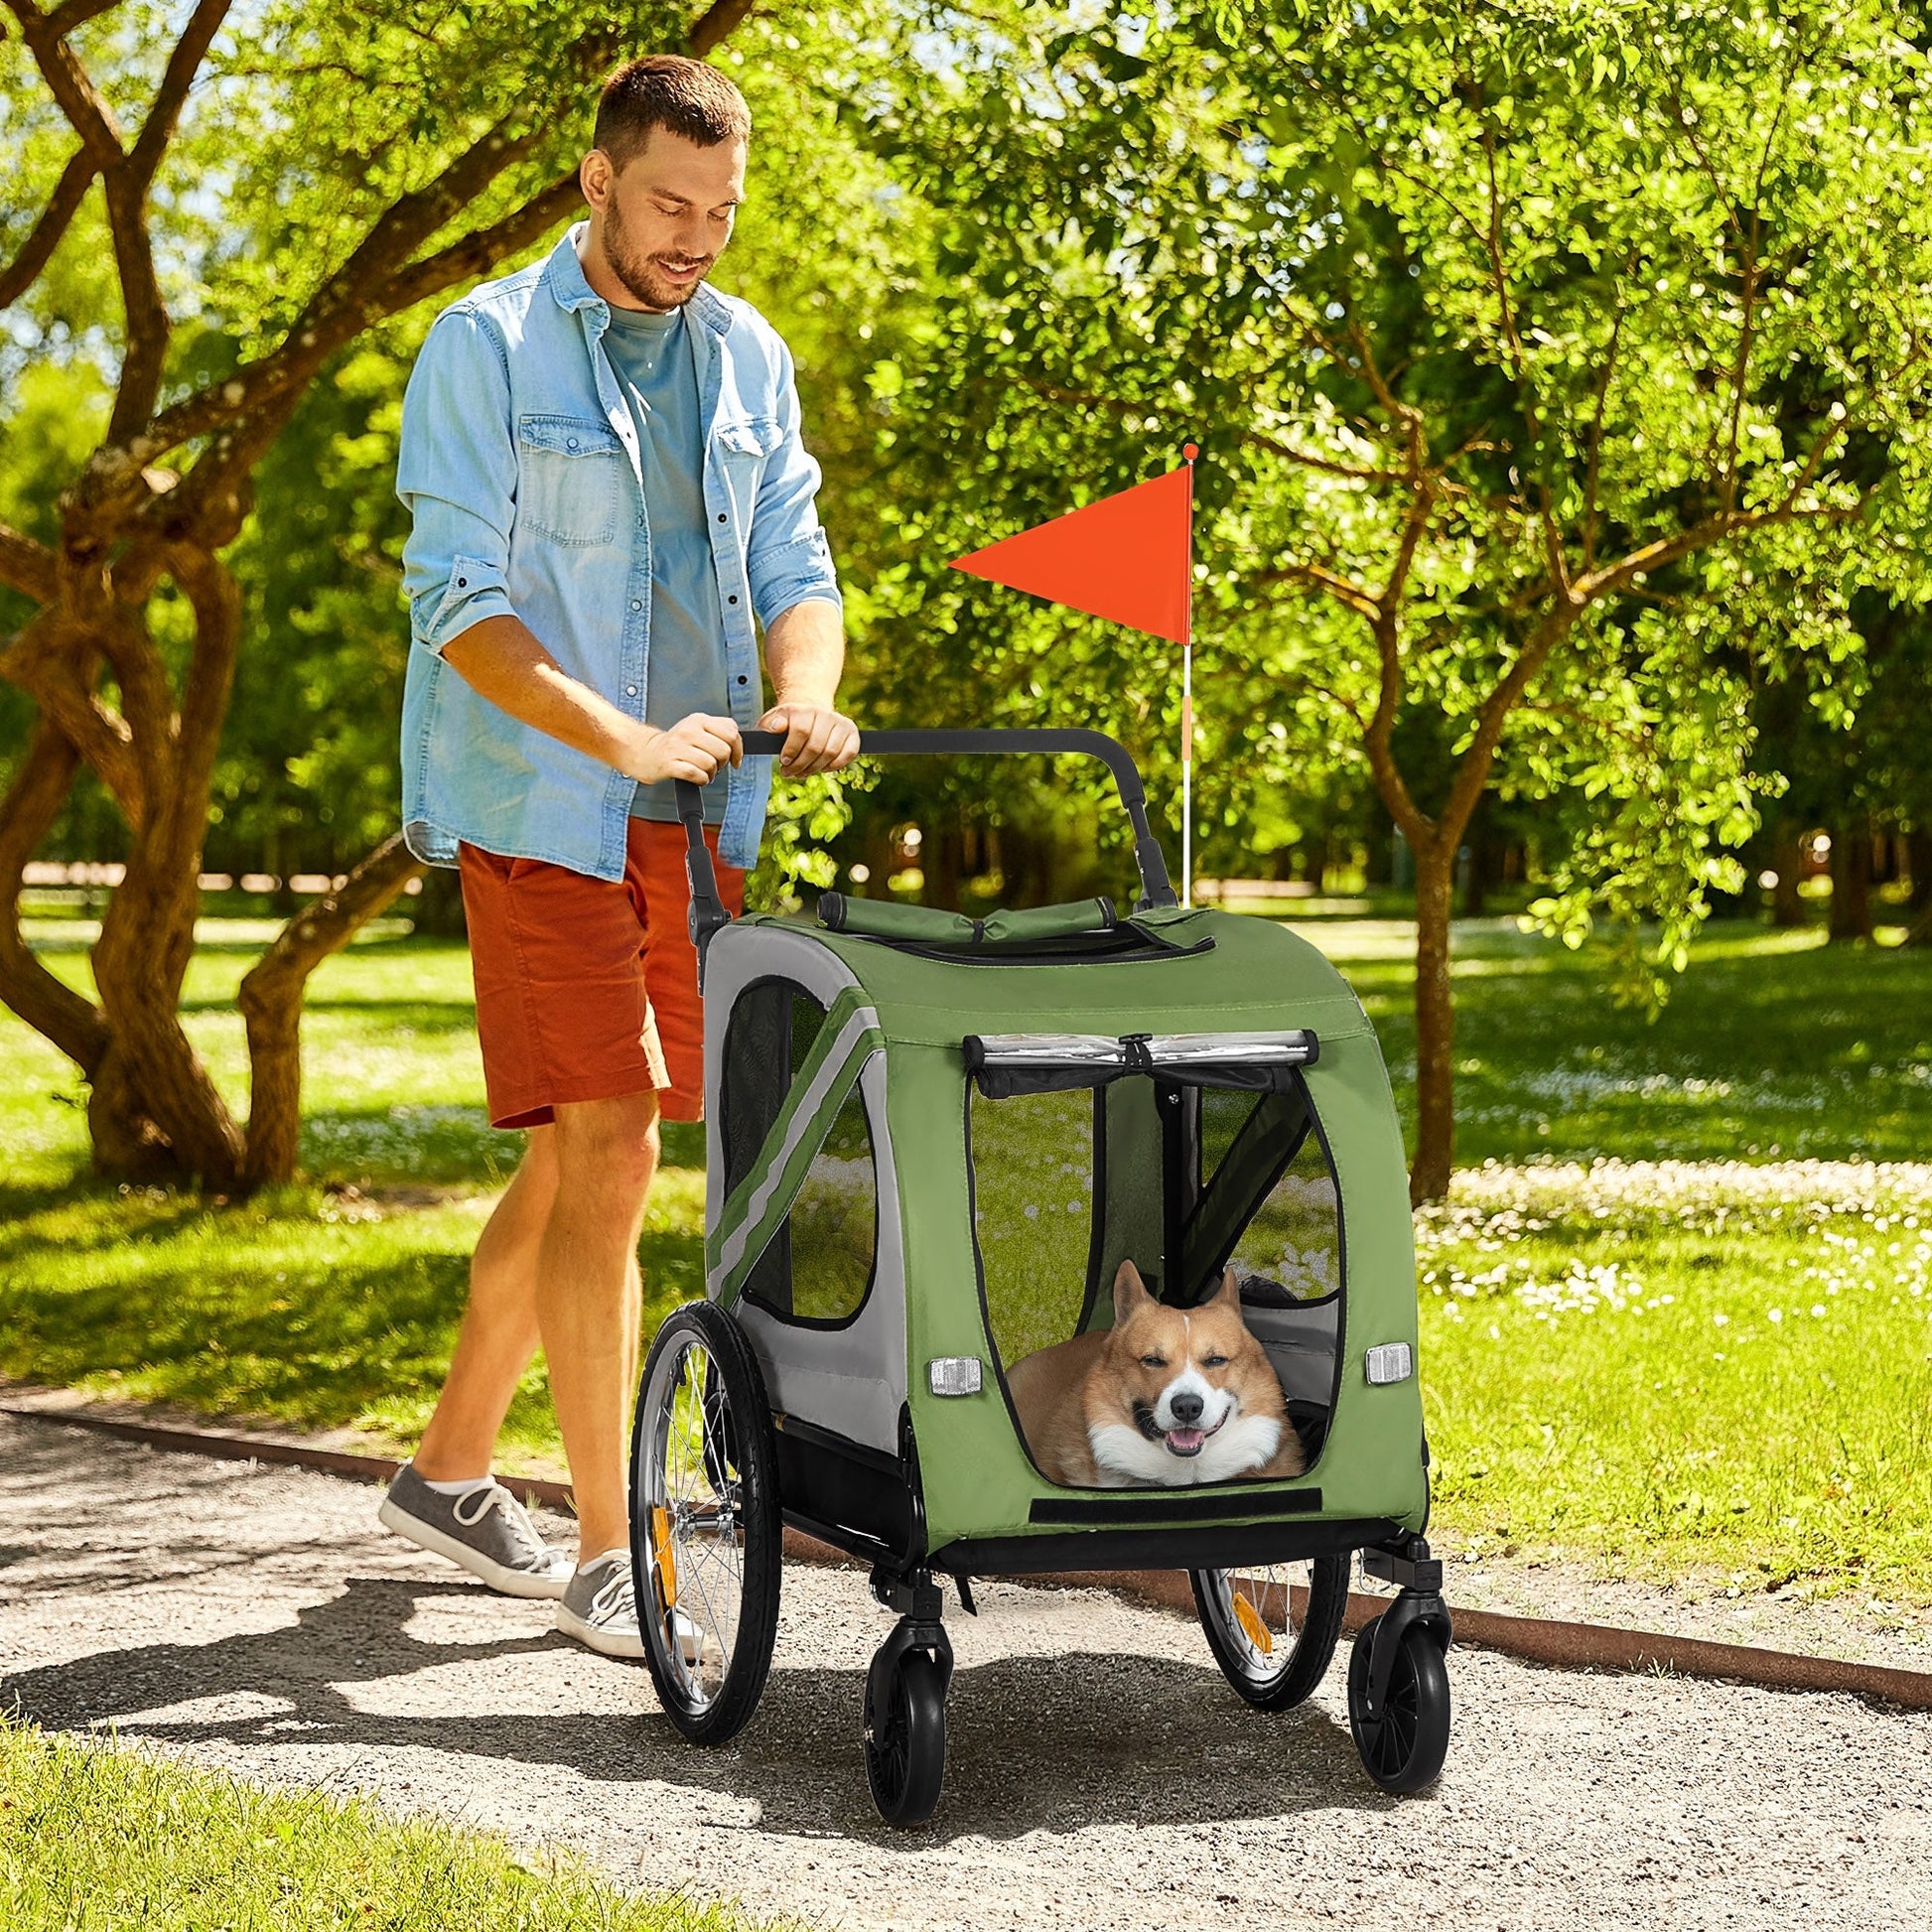 Dog Bike Trailer, 2-in-1 Dog Wagon Pet Stroller for Travel with Universal Wheel Reflectors Flag, for Small and Medium Dogs, Green at Gallery Canada